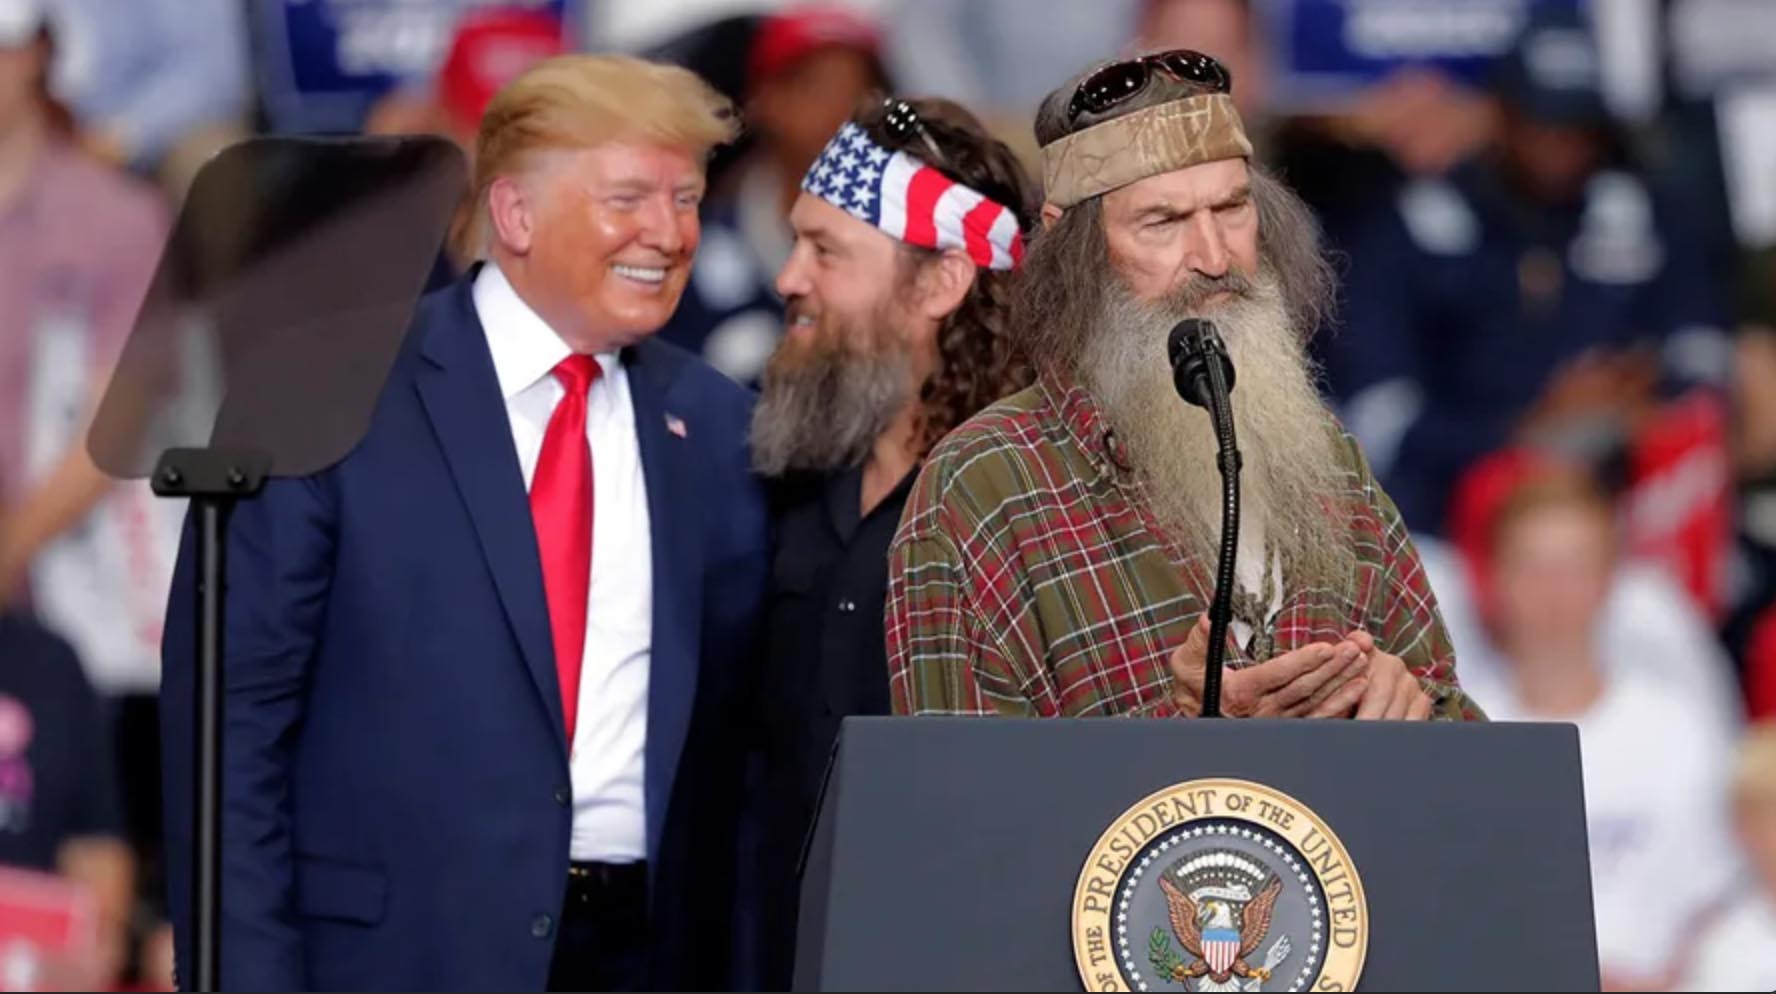 <p><i>Duck Dynasty</i> patriarch Phil Robertson has come forward in his 2022 book, <i>Un-Cancelled</i>, with a somewhat supportive statement on former president Trump. <a href="https://www.washingtonexaminer.com/opinion/washington-secrets/duck-commander-ready-for-trump-2-0"><b>He writes</b></a>:</p><blockquote>You won’t find me invading the United States Capitol when my candidate loses an election. No, my only goal is to destroy bad ideas that stand opposed to the knowledge of God with the gospel of truth. As far as [Trump's] policies goes, he’s pro-life, pro-gun, pro-God. I shared Jesus with him multiple times, and he listened.</blockquote>